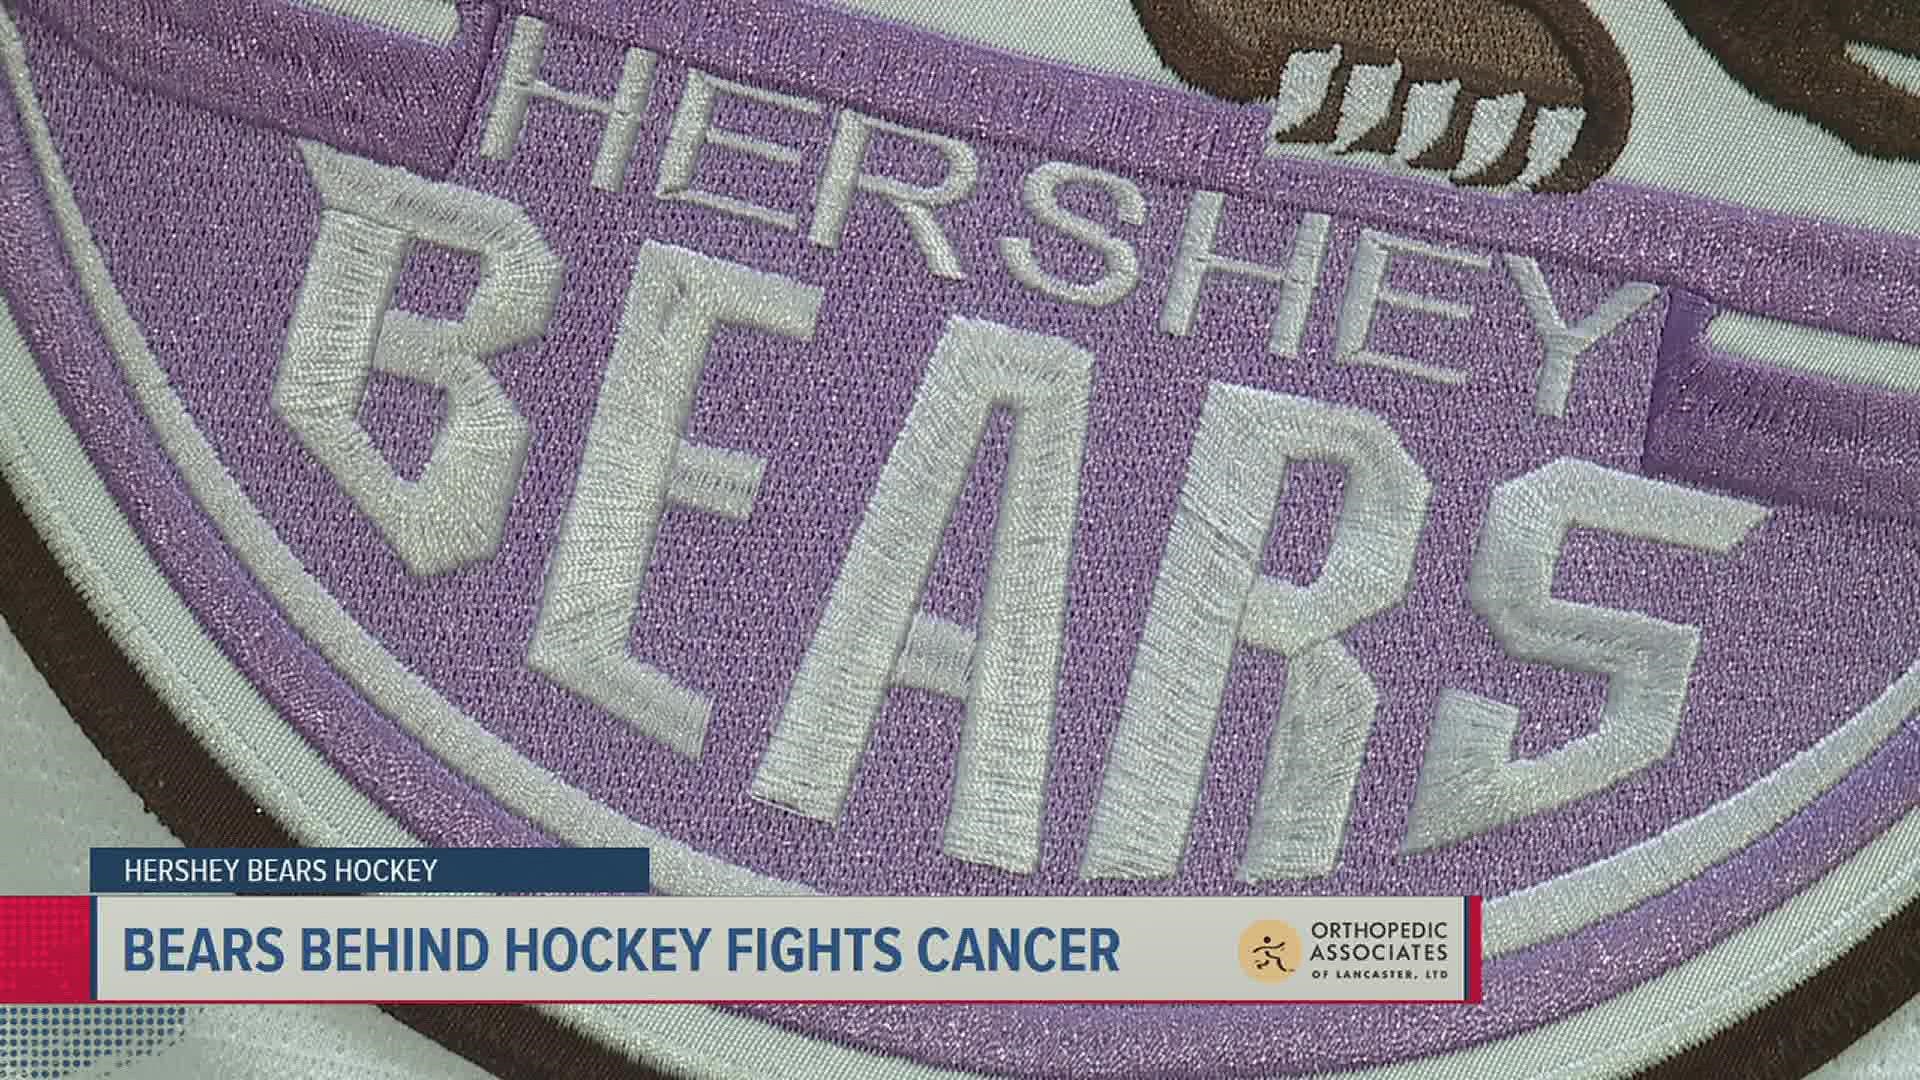 Bears honor those who have been lost and continue to battle cancer everyday